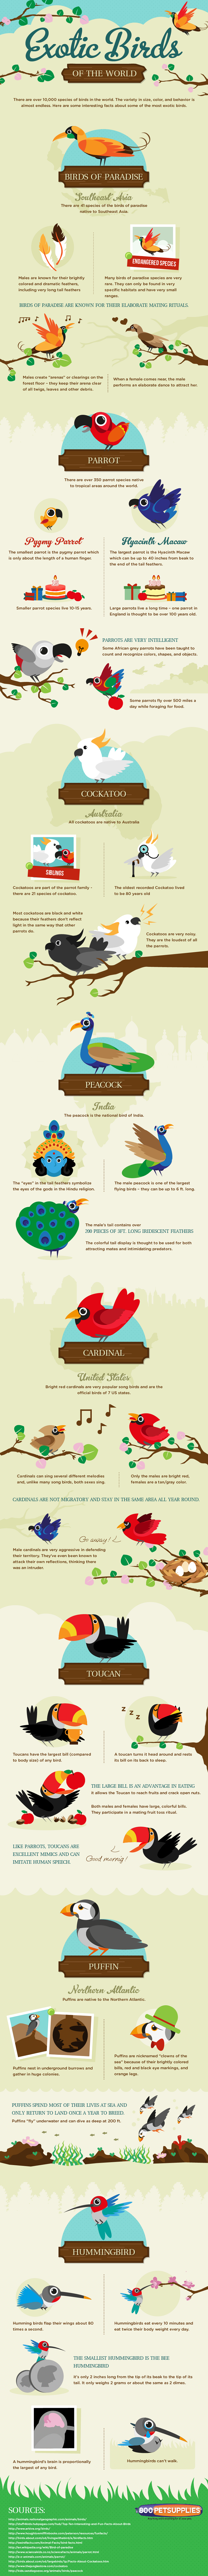 The-most-exotic-birds-infographic-757[1]